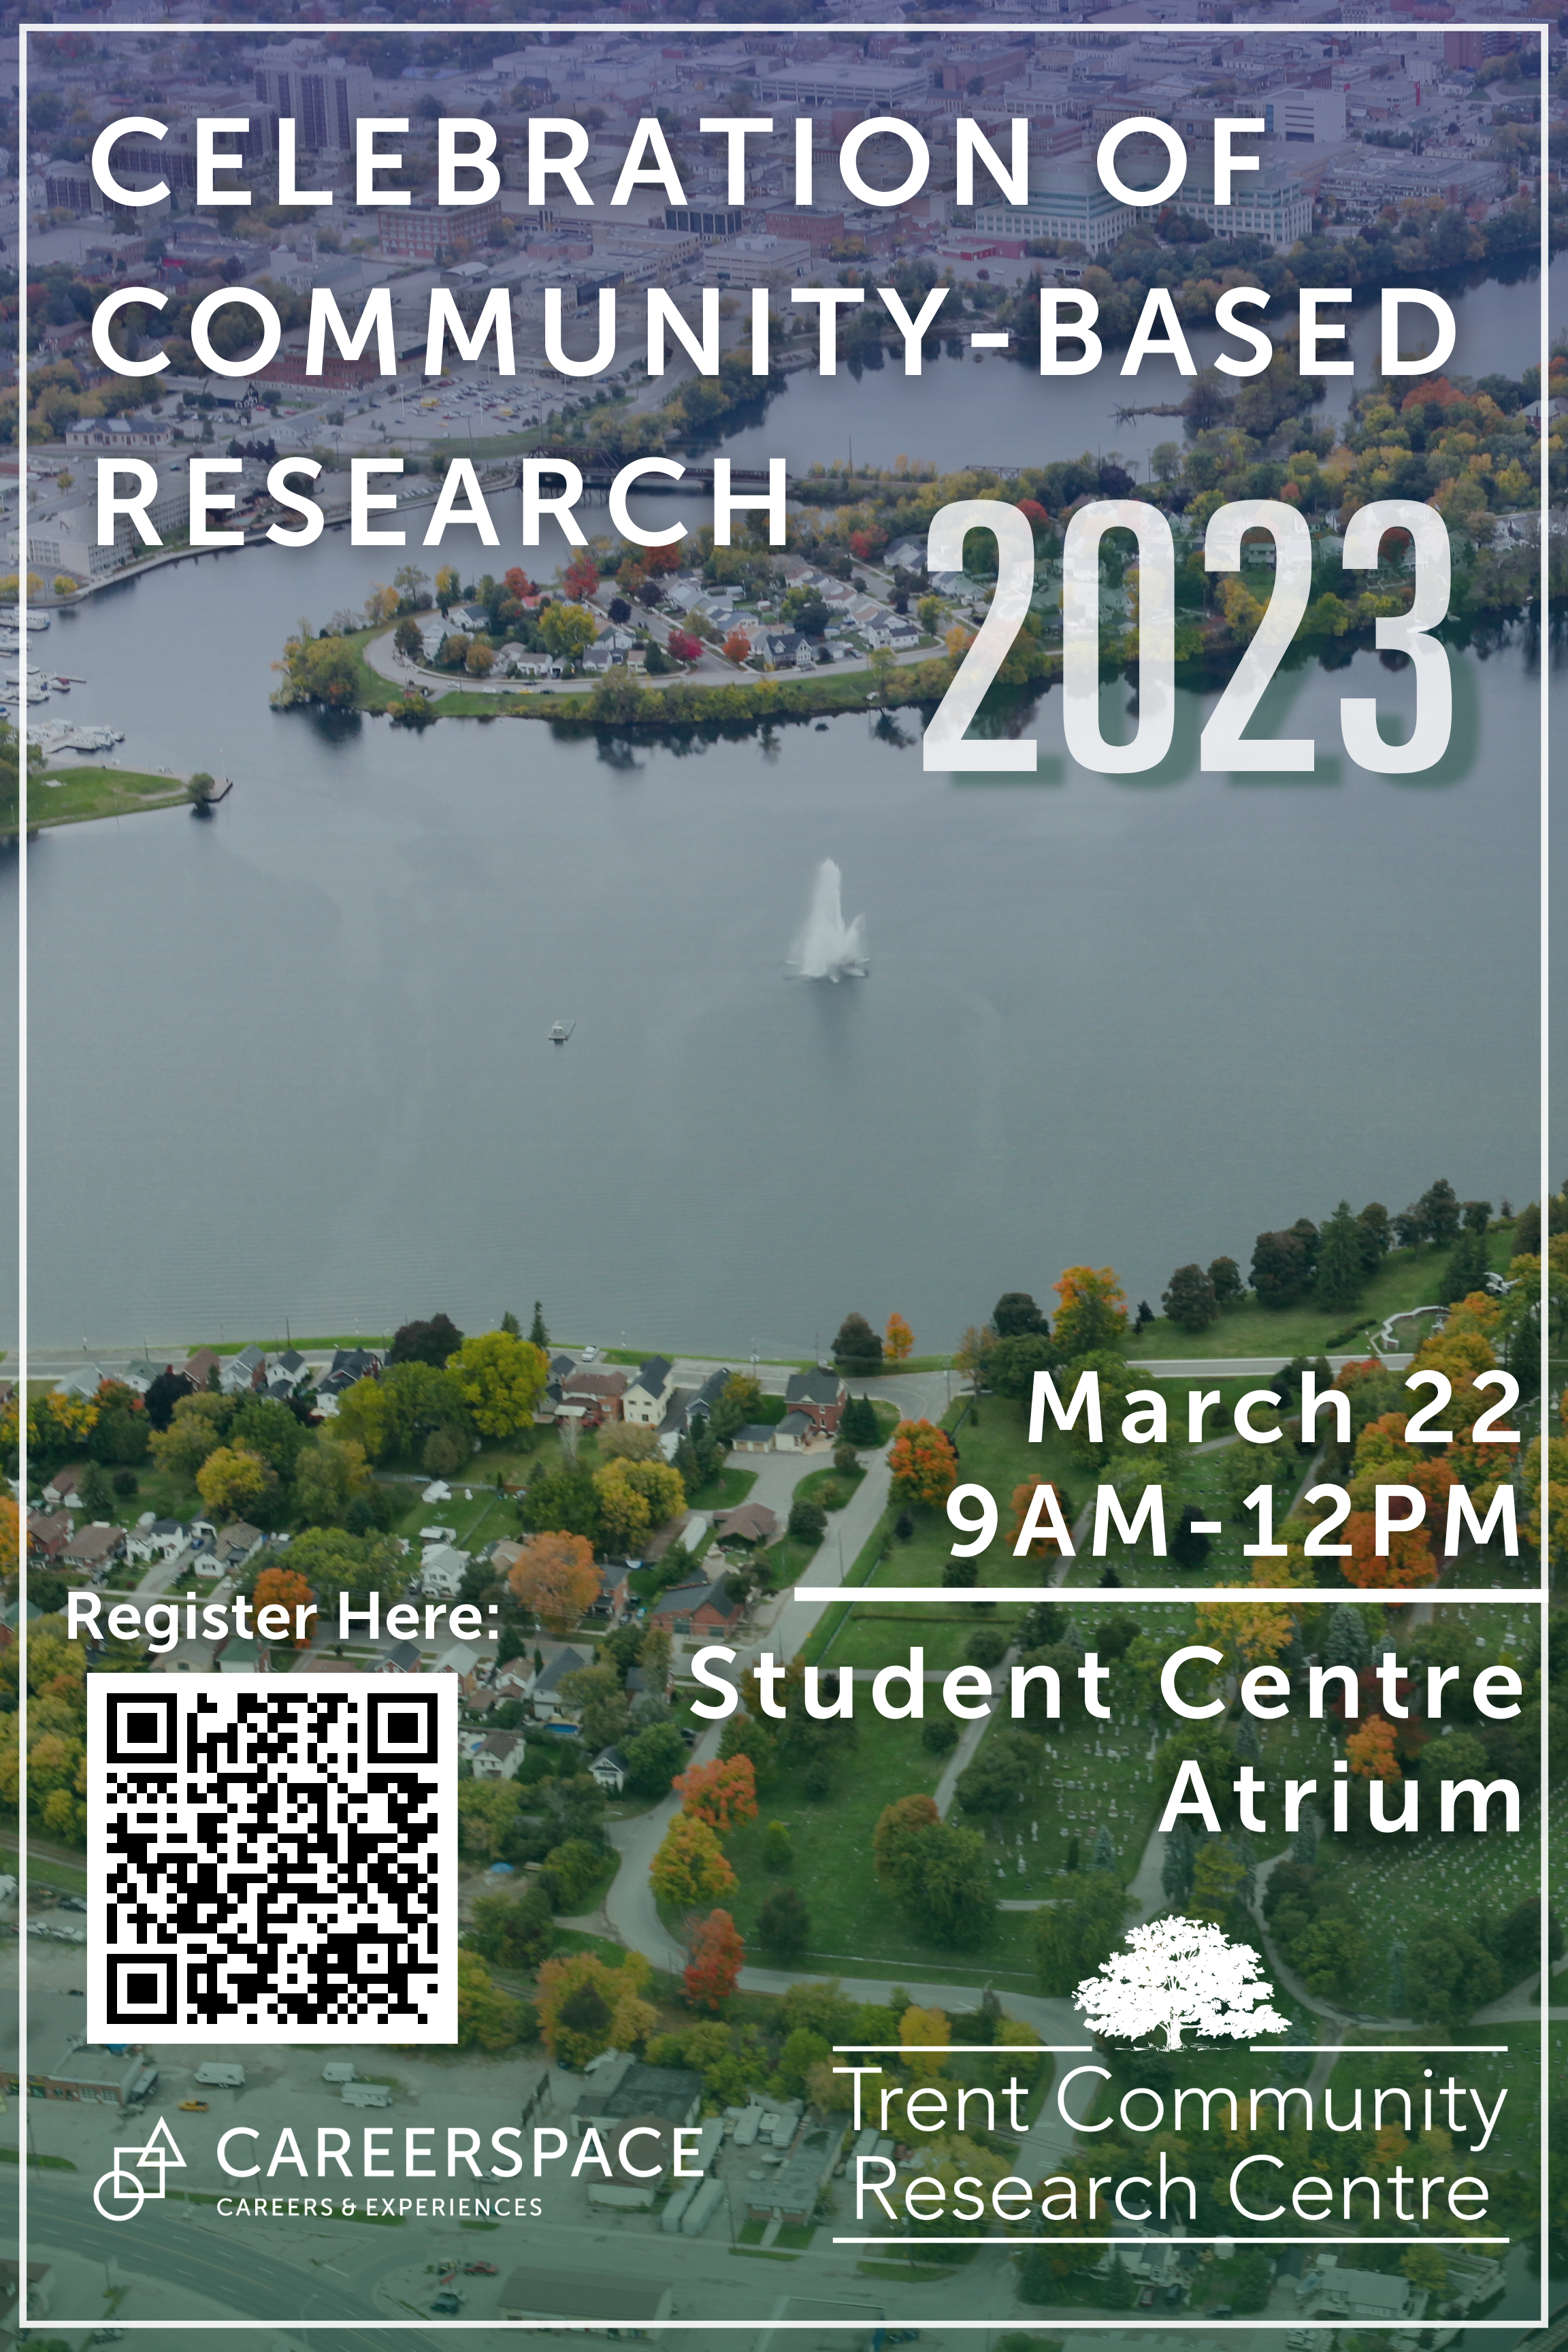 Celebration of Research 2023 Poster with TCRC Logo and QR Code to register